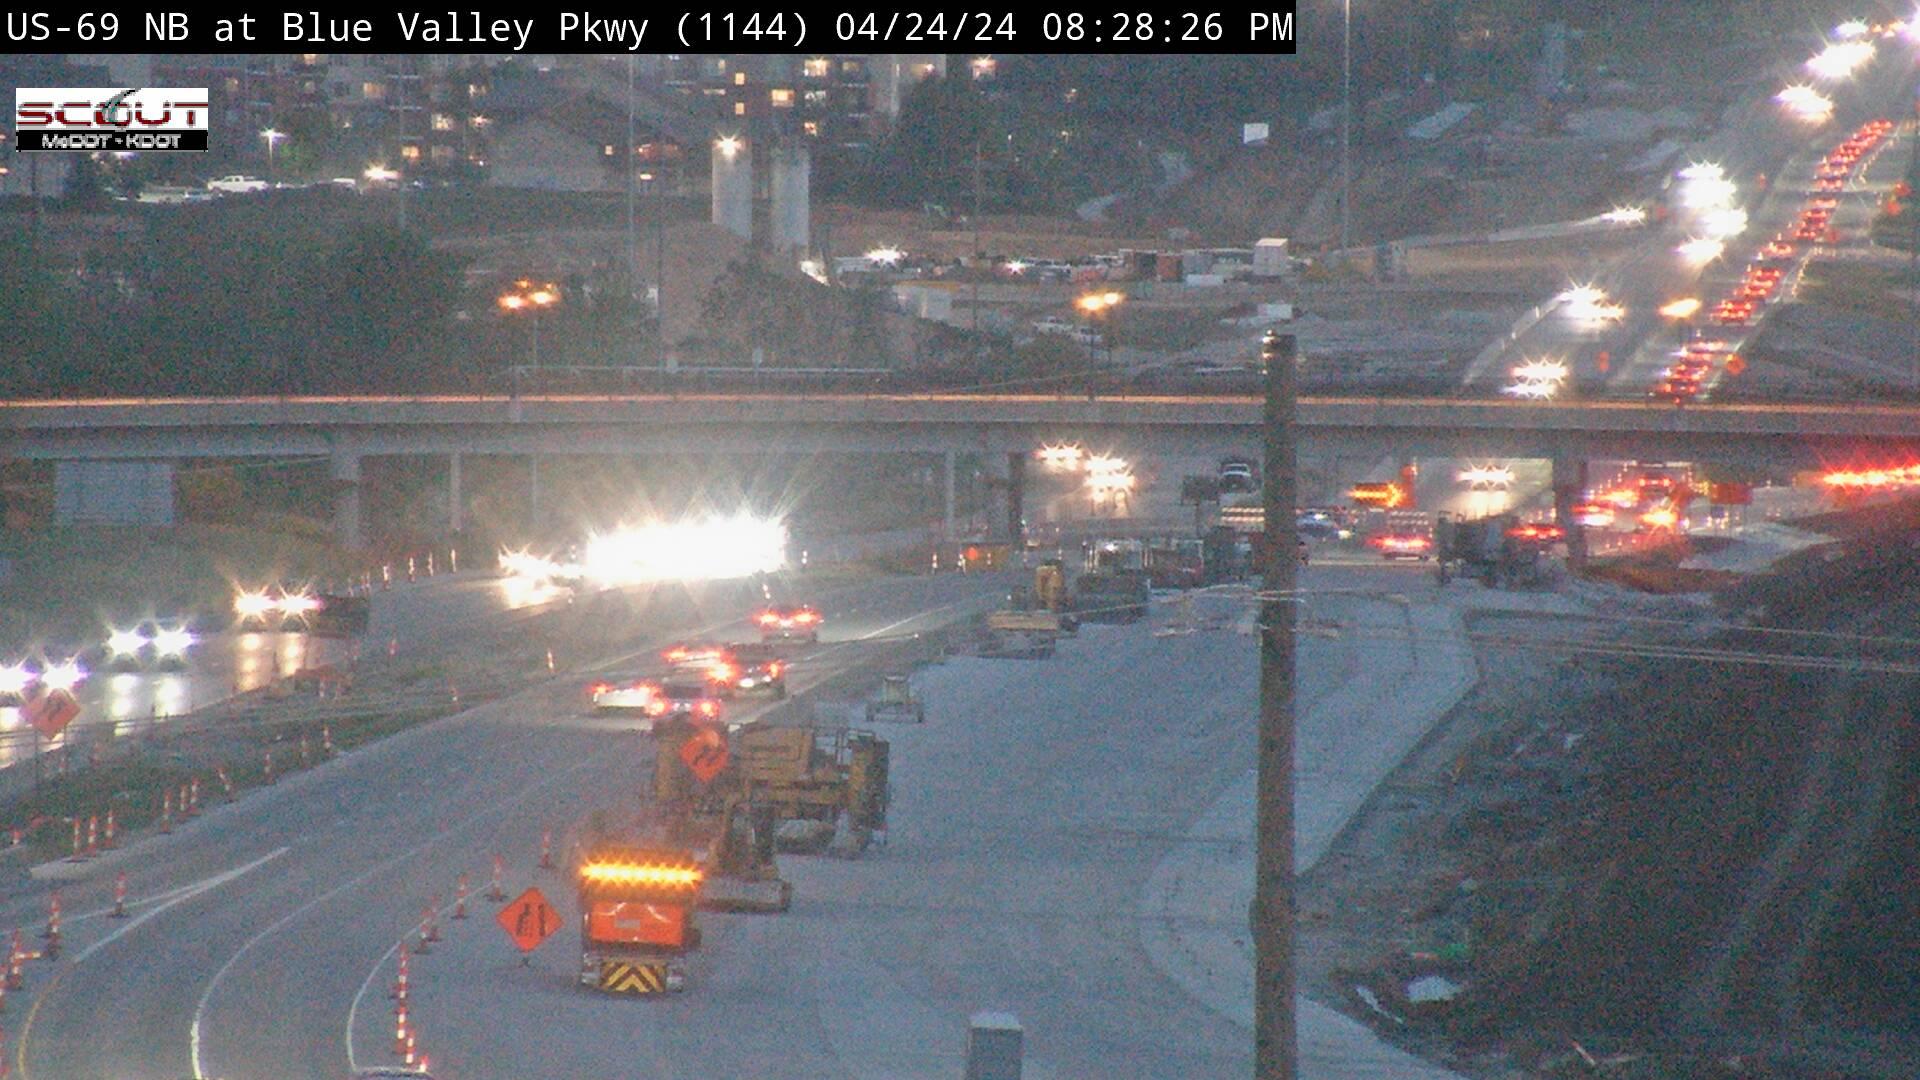 Traffic Cam Overland Park: US- N @ Blue Valley Parkway Player